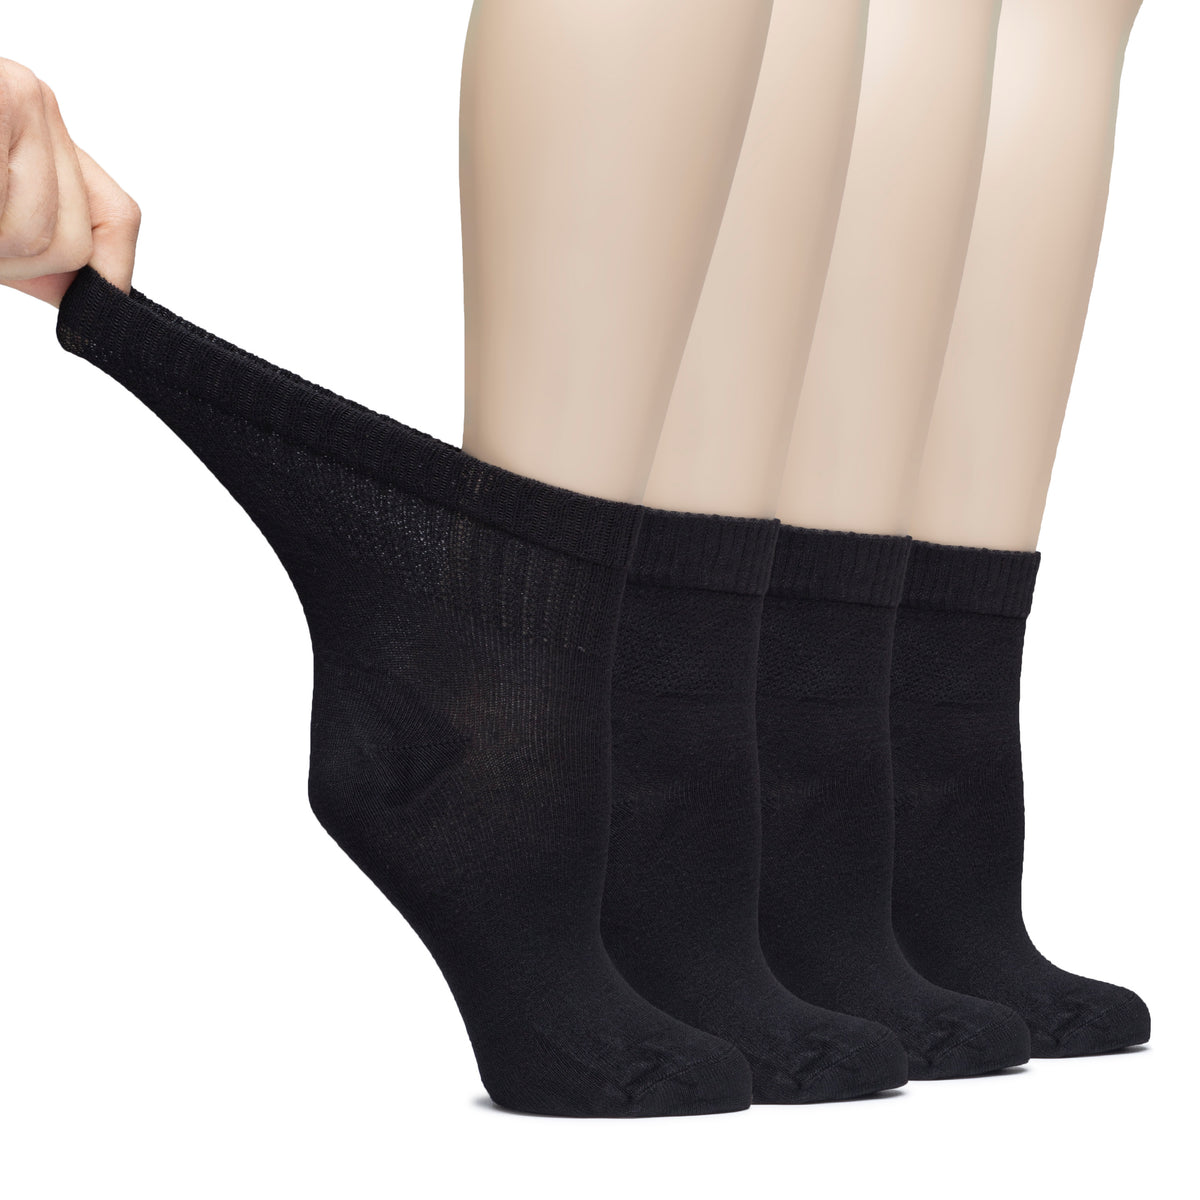 A photo of a woman's feet in black diabetic bamboo ankle socks, with one foot slightly in front of the other.